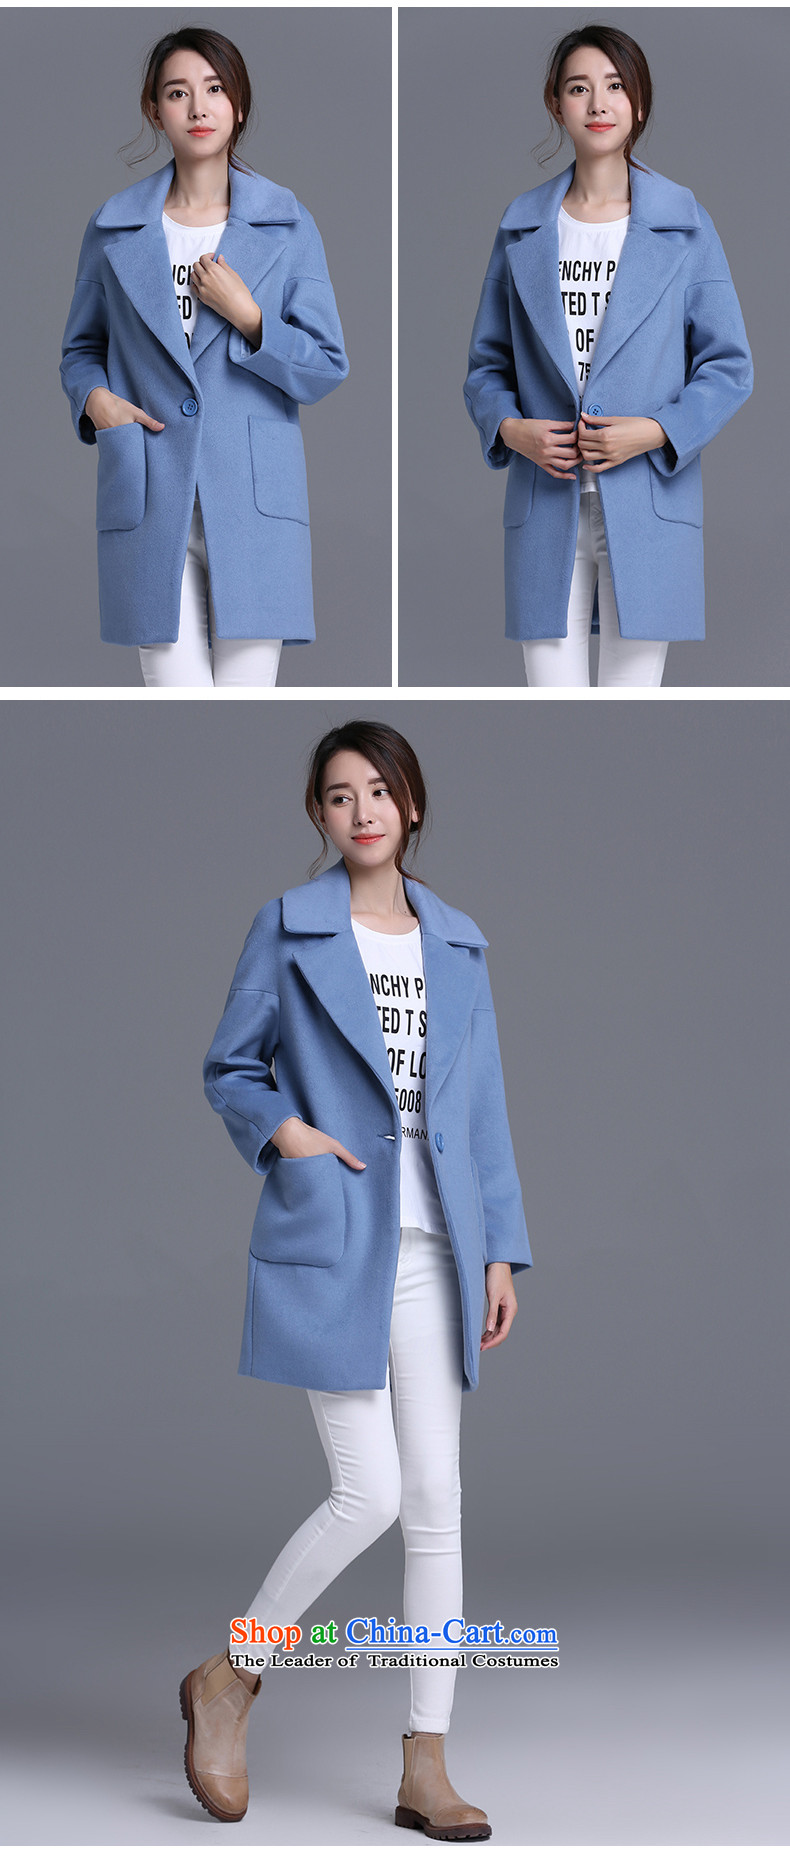 The Champs Elysees Honey Love 2015 autumn and winter new large arts van pure color jacket fashion? 